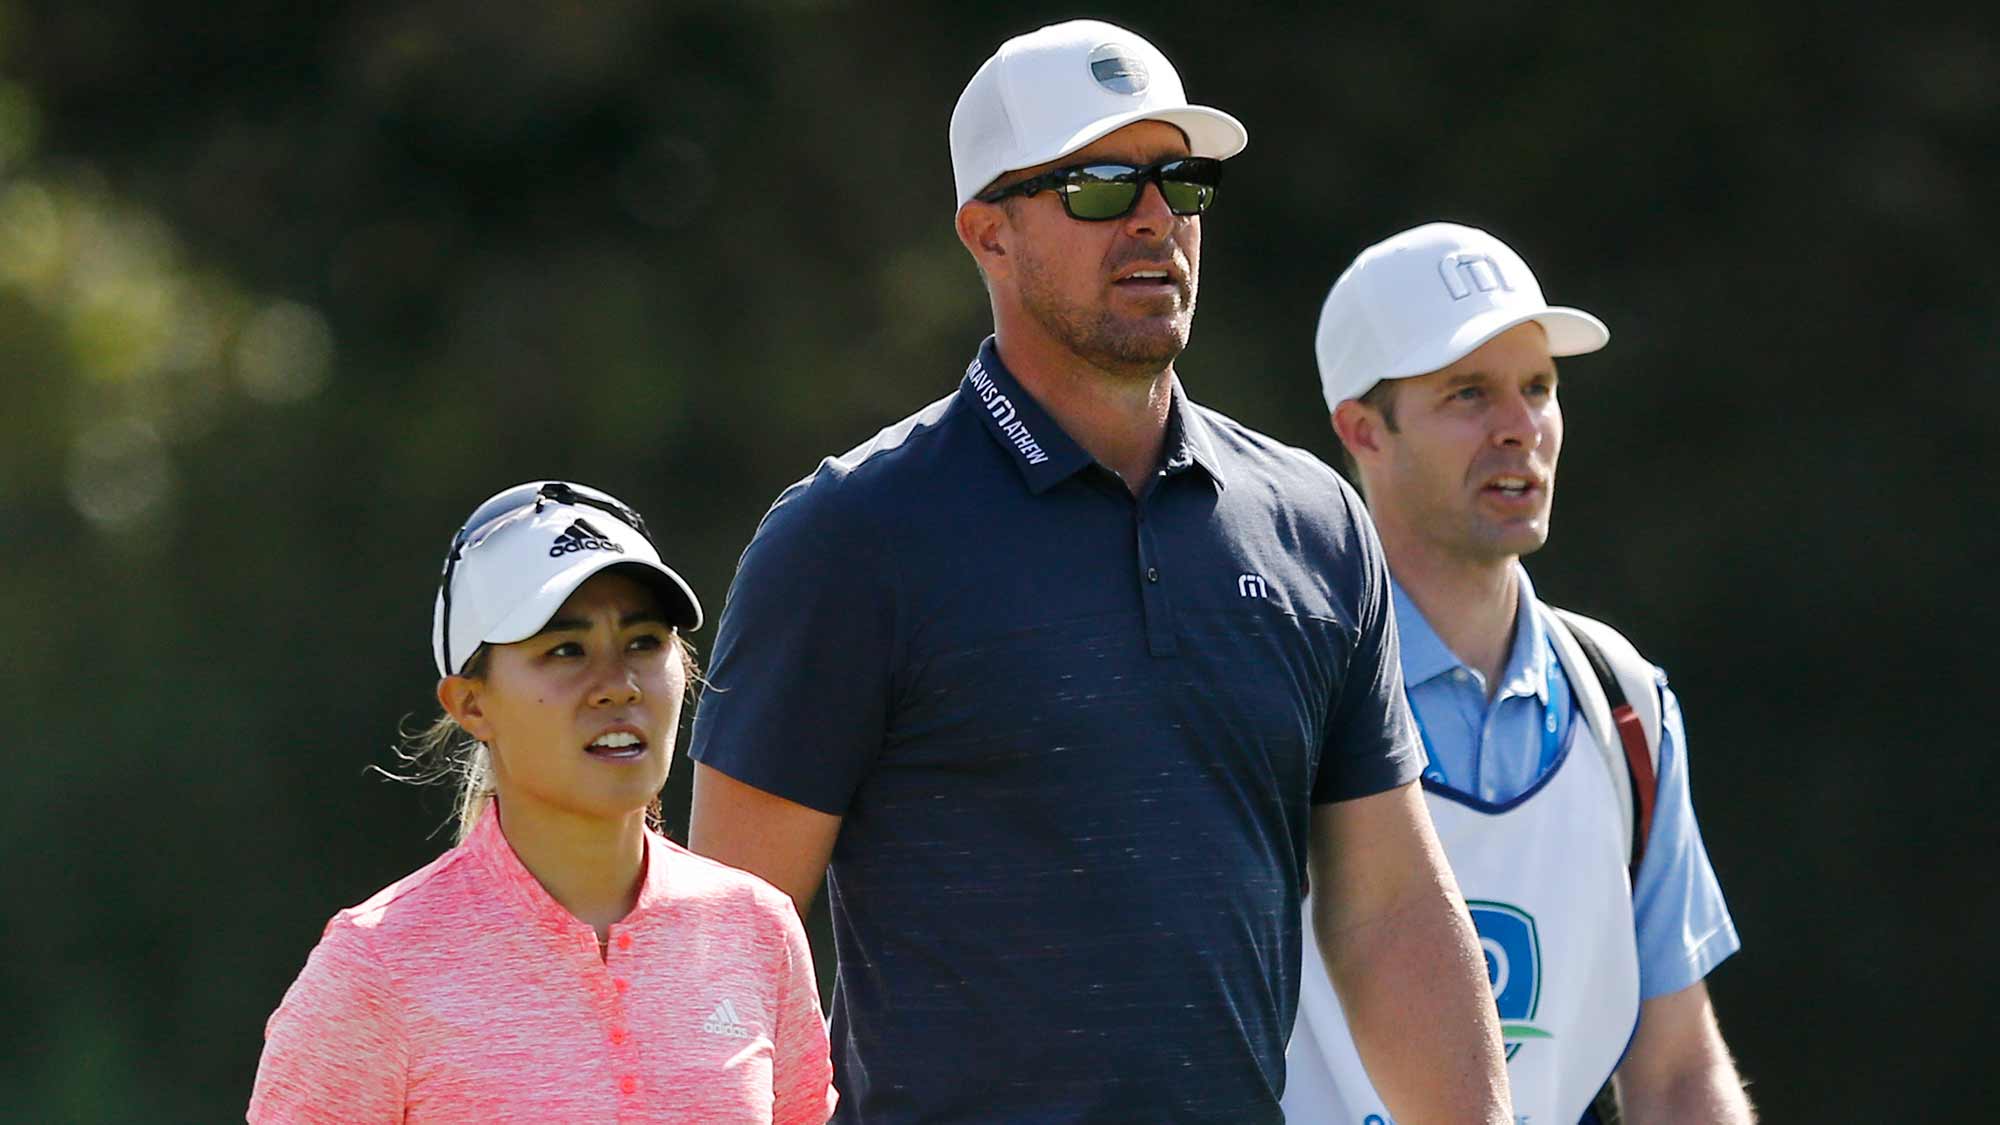  Danielle Kang talks with former MLB pitcher Mark Mulder as they walk up the seventh fiarway during the second round of the Diamond Resorts Tournament of Champions at Tranquilo Golf Course at Four Seasons Golf and Sports Club Orlando on January 17, 2020 in Lake Buena Vista, Florida